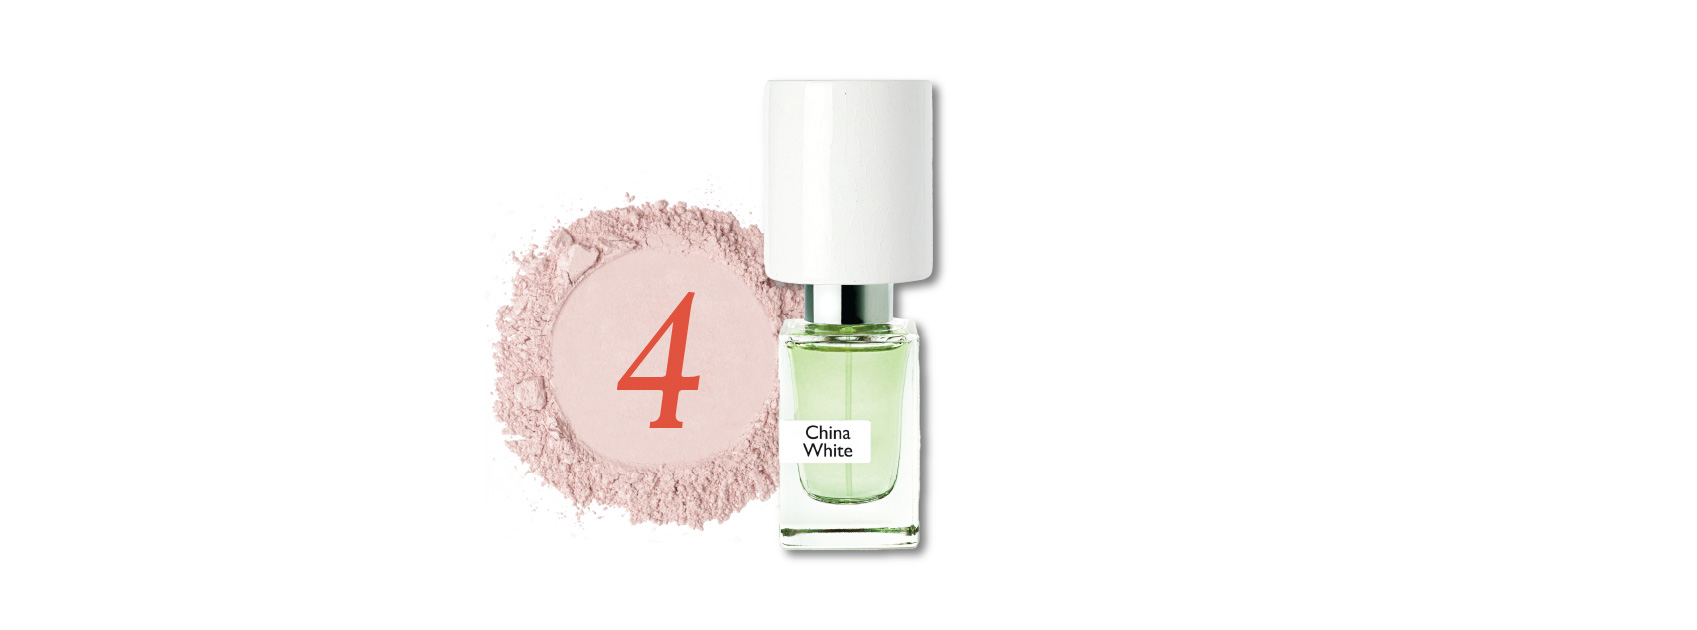 bottle of china white perfume by nasomatto number 4 powdery scent